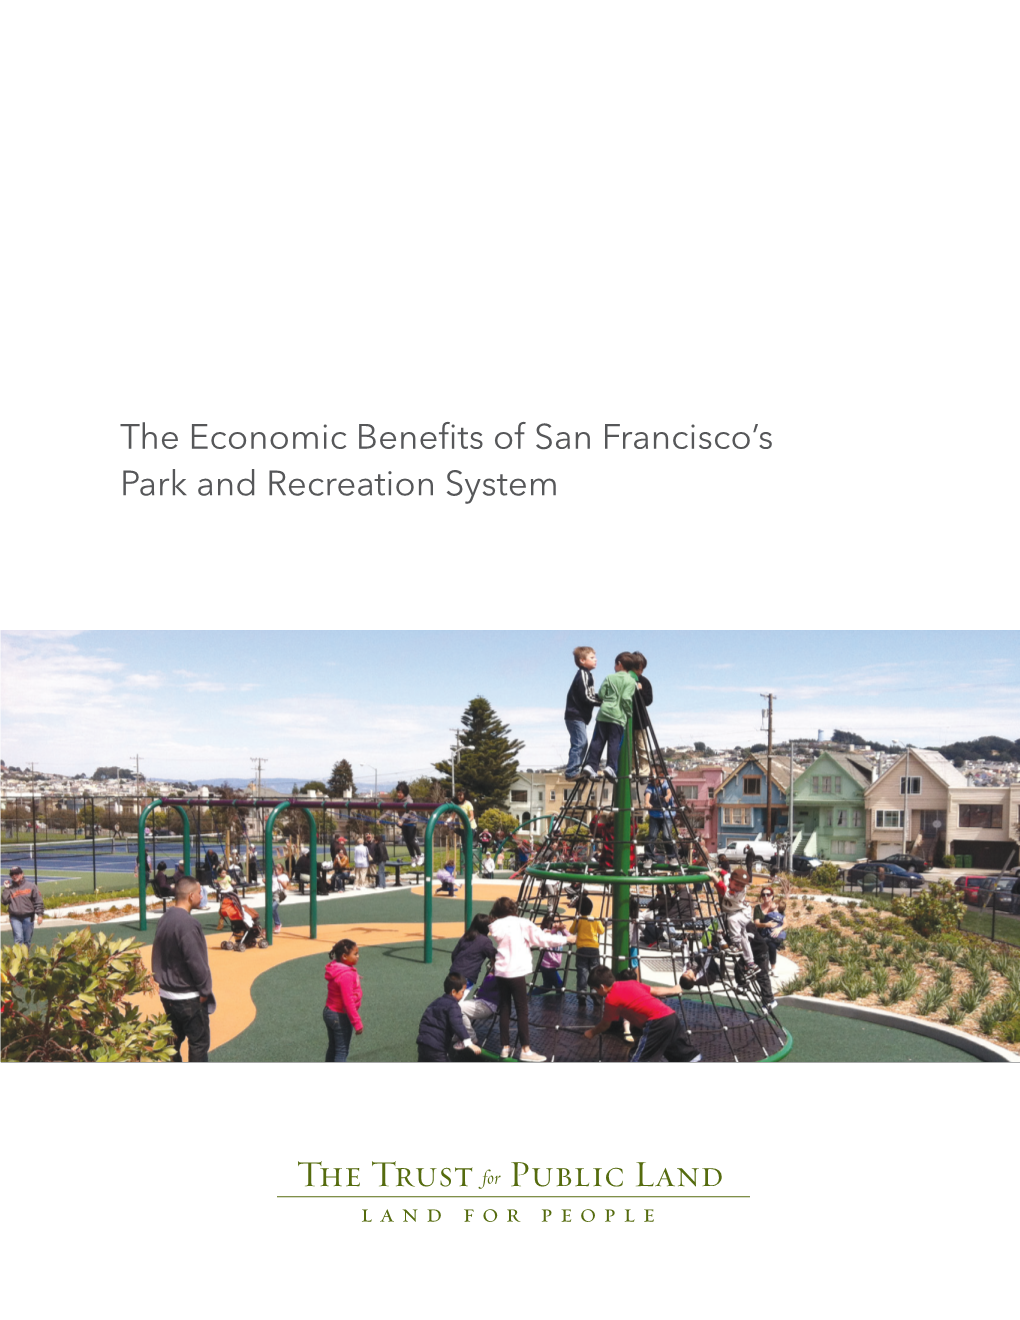 The Economic Benefits of San Francisco's Park and Recreation